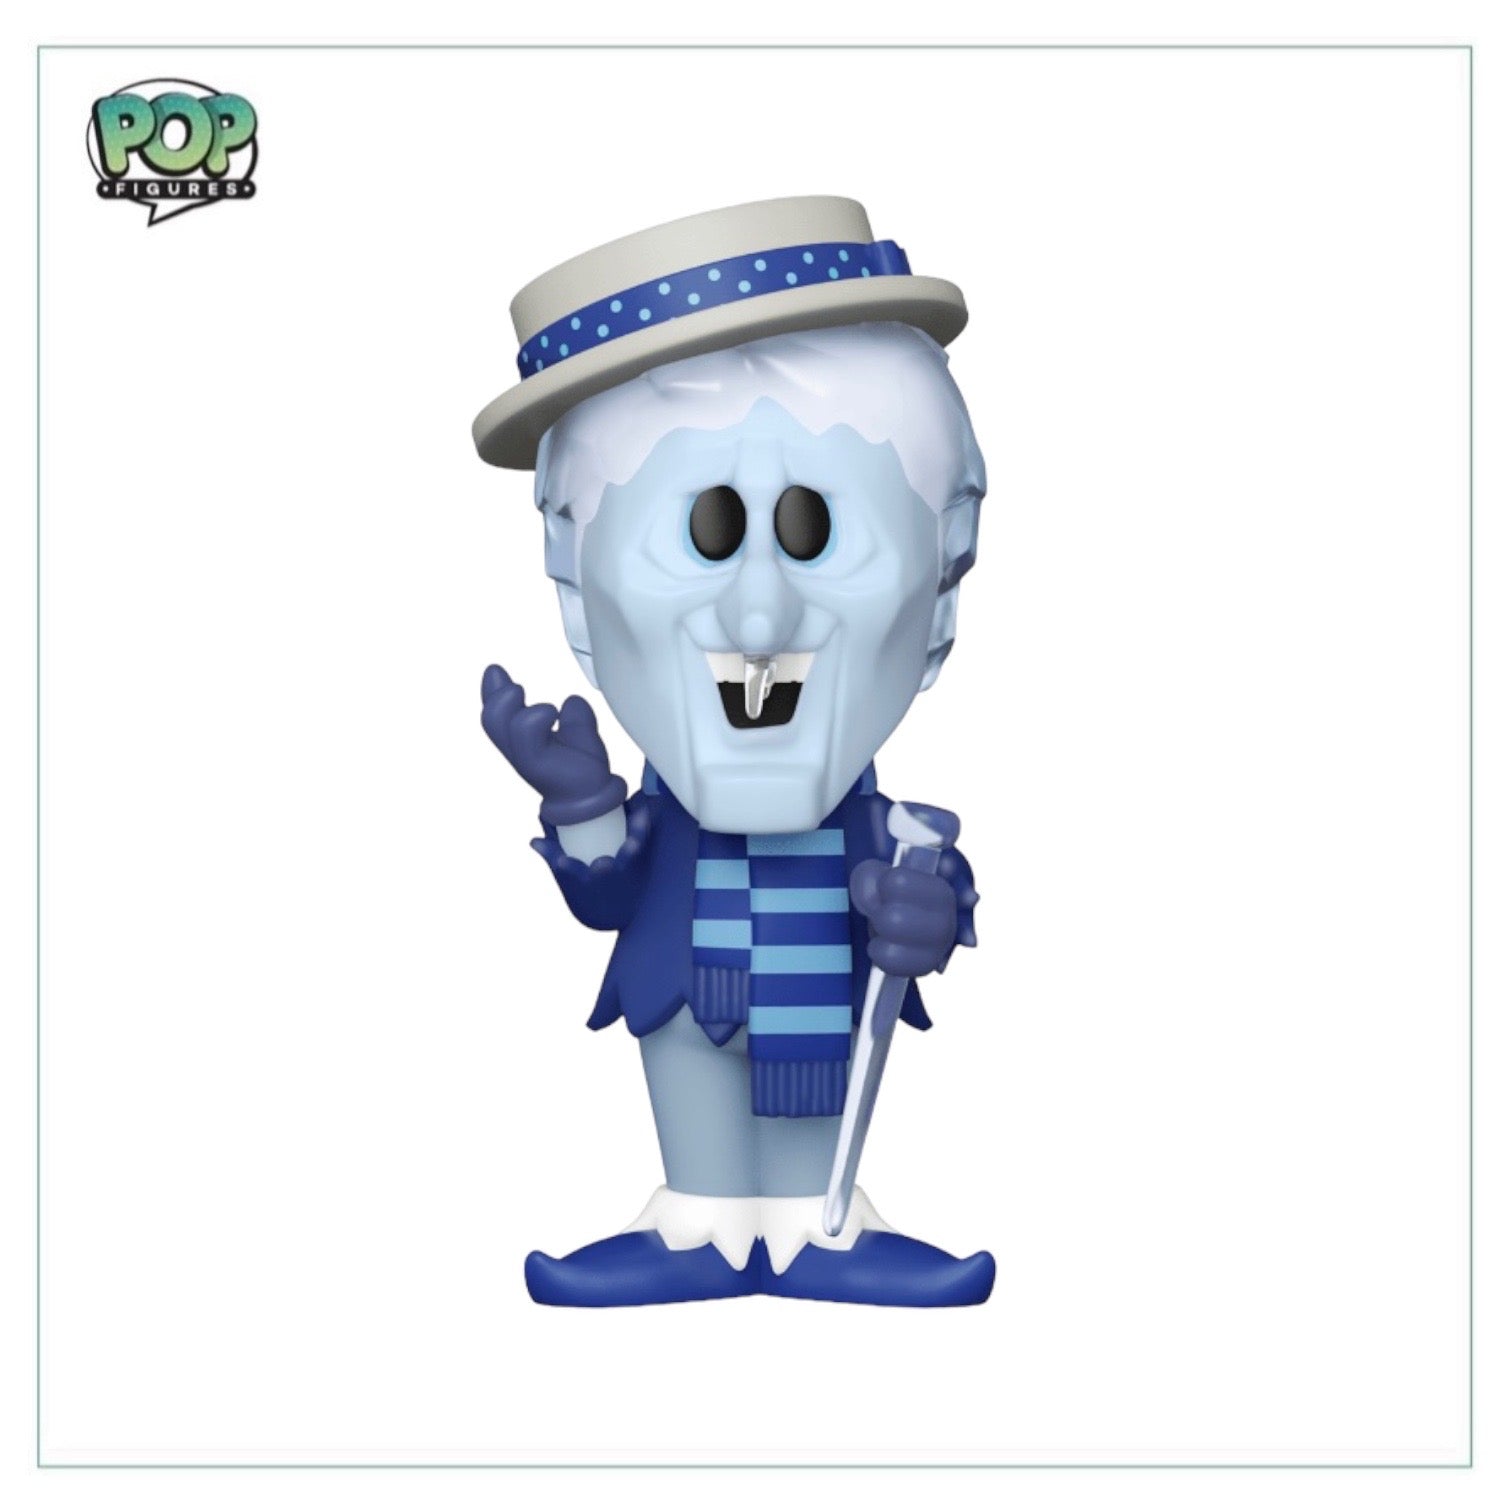 Snow Miser Funko Soda Vinyl Figure! - The Year Without a Santa Claus - International LE7500 Pcs - Chance of Chase